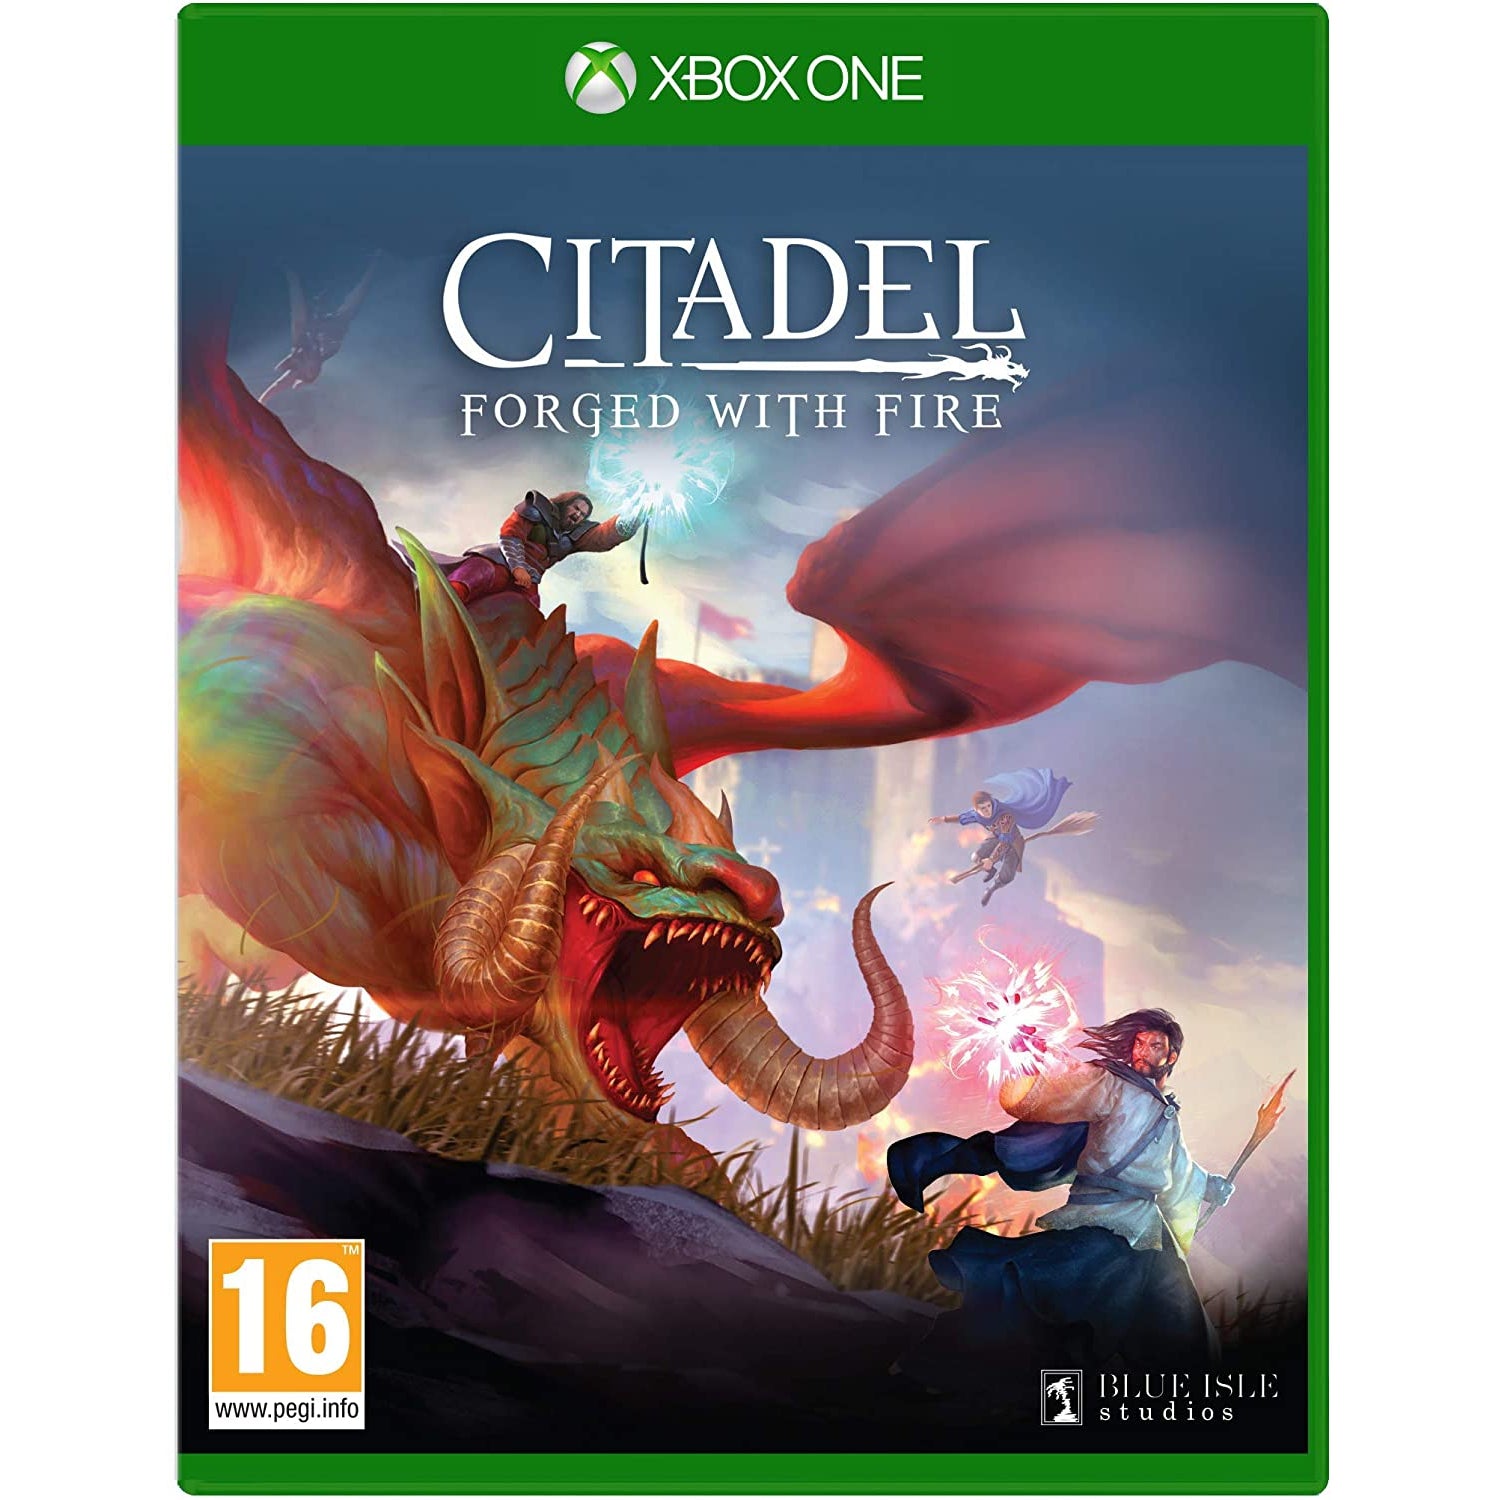 Citadel Forged with Fire (Xbox One)